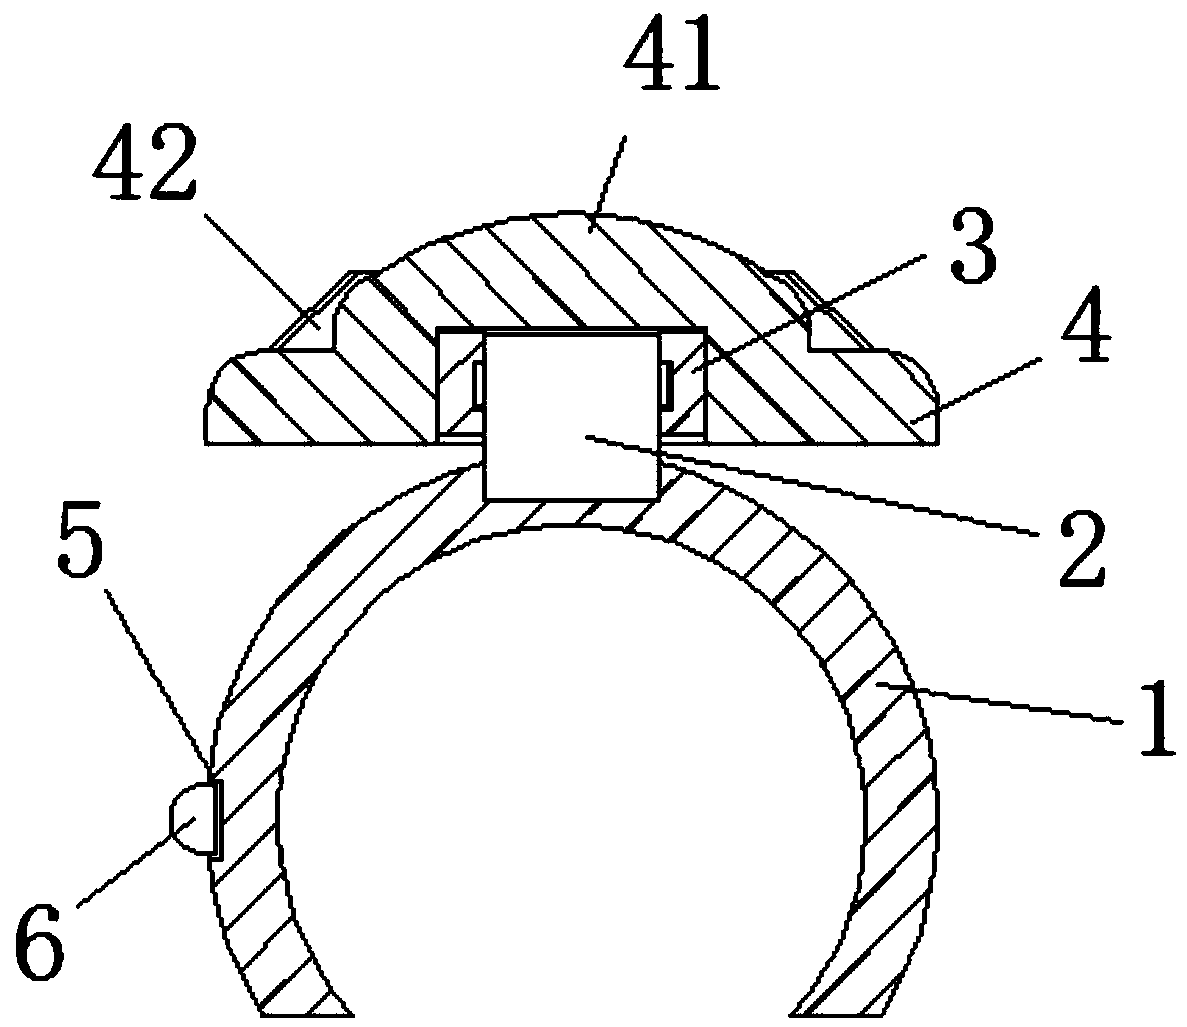 A steering wheel kit for an automobile